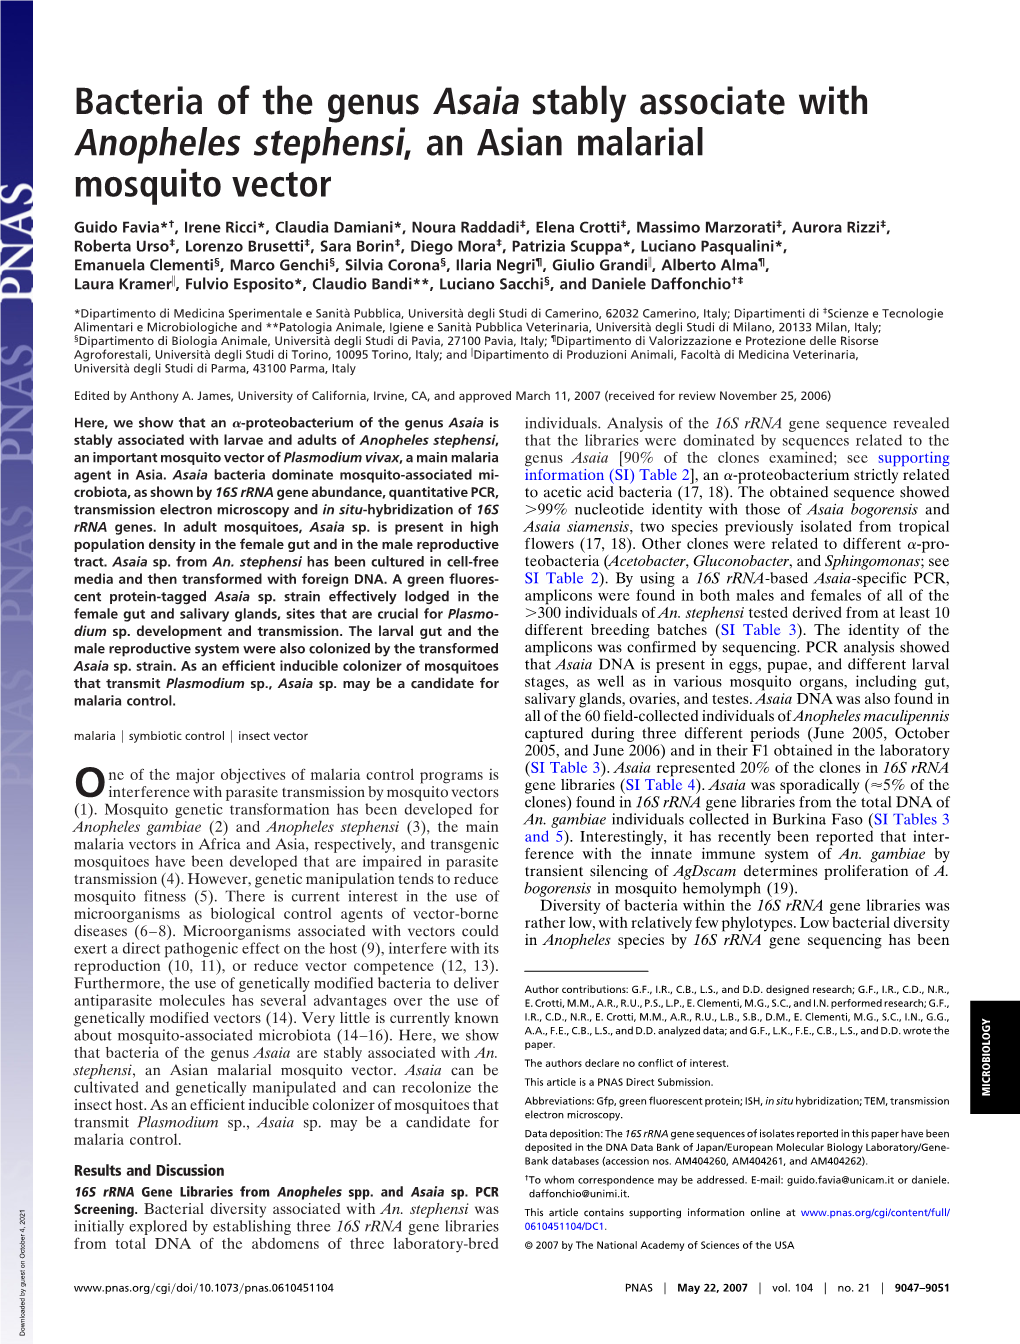 Bacteria of the Genus Asaia Stably Associate with Anopheles Stephensi, an Asian Malarial Mosquito Vector